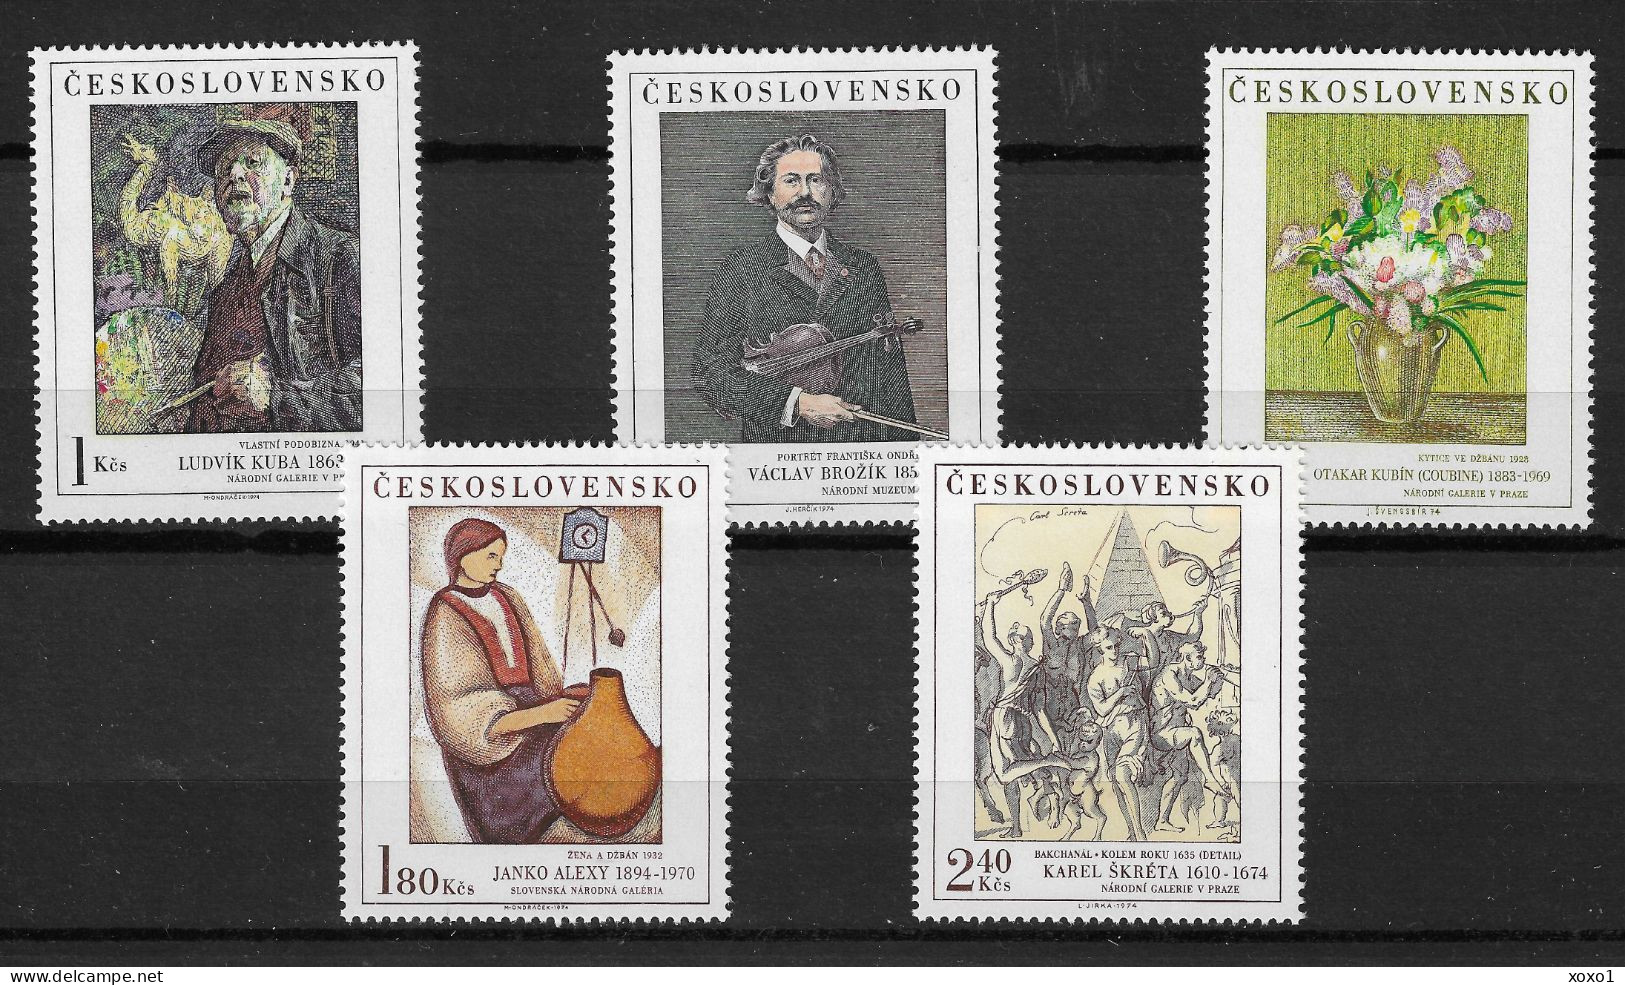 Czechoslovakia 1974 MiNr. 2232 - 2236 National Galleries (IX)  Art, Painting 5v  MNH**  5.00 € - Unused Stamps